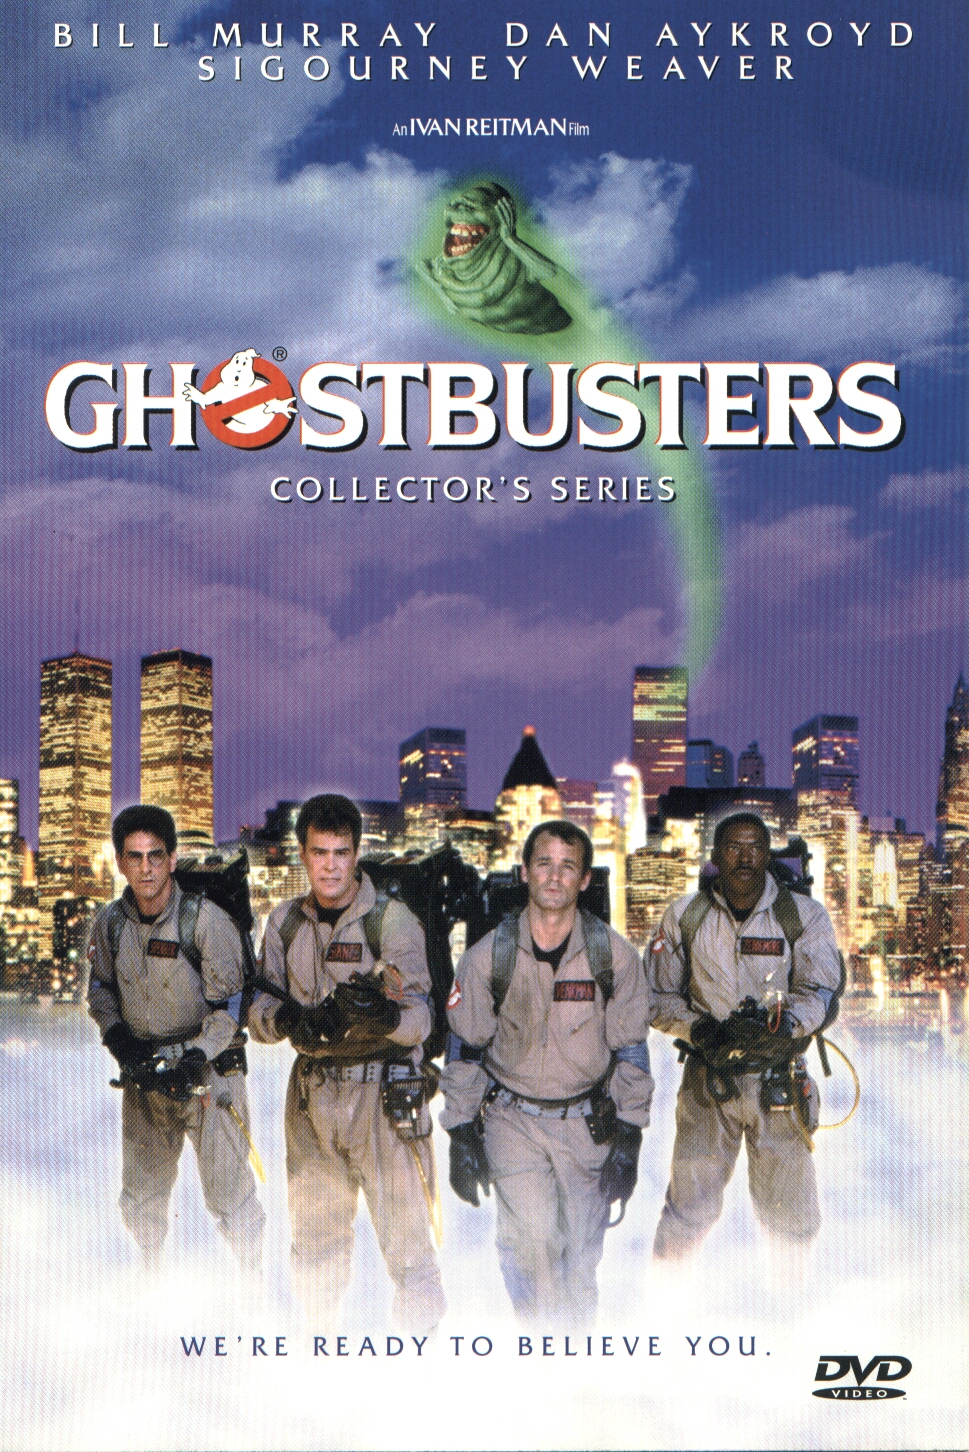 The Real Ghost Busters movie